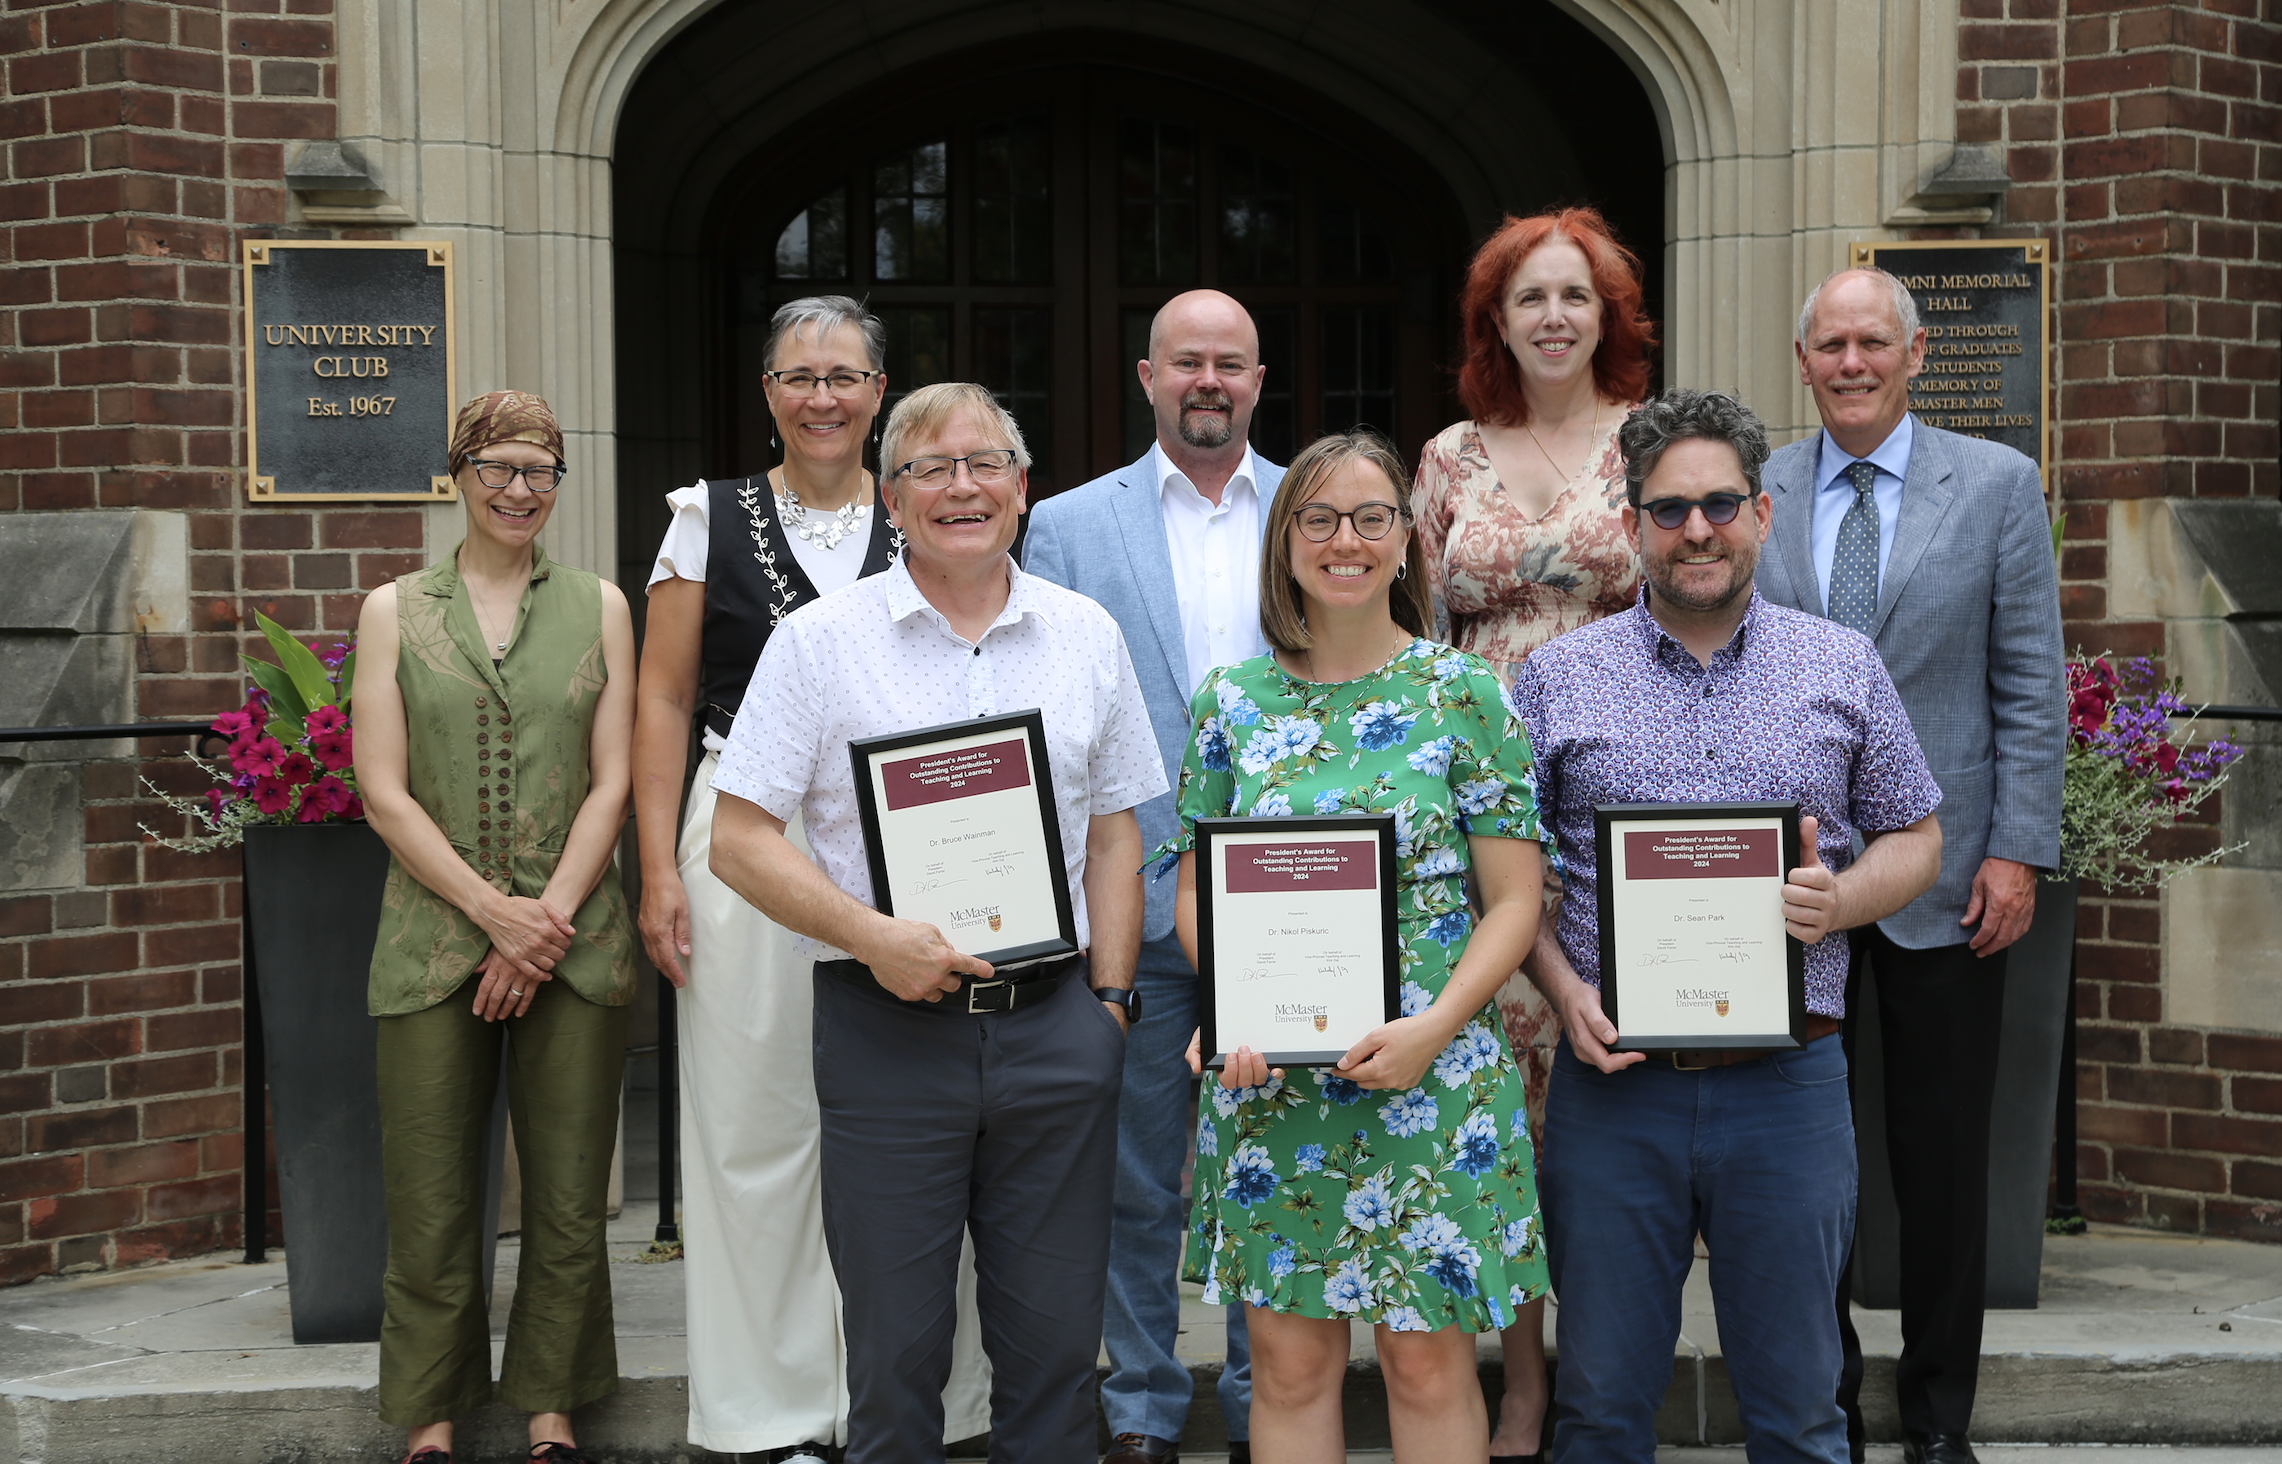 2024 President Award Winners: Back row from left to right: Kim Dej, Cheryl Main, Mel Rutherford, Michelle MacDonald, David Farrar. Front row from left to right: Bruce Wainman, Nikol Piskuric, and Sean Park